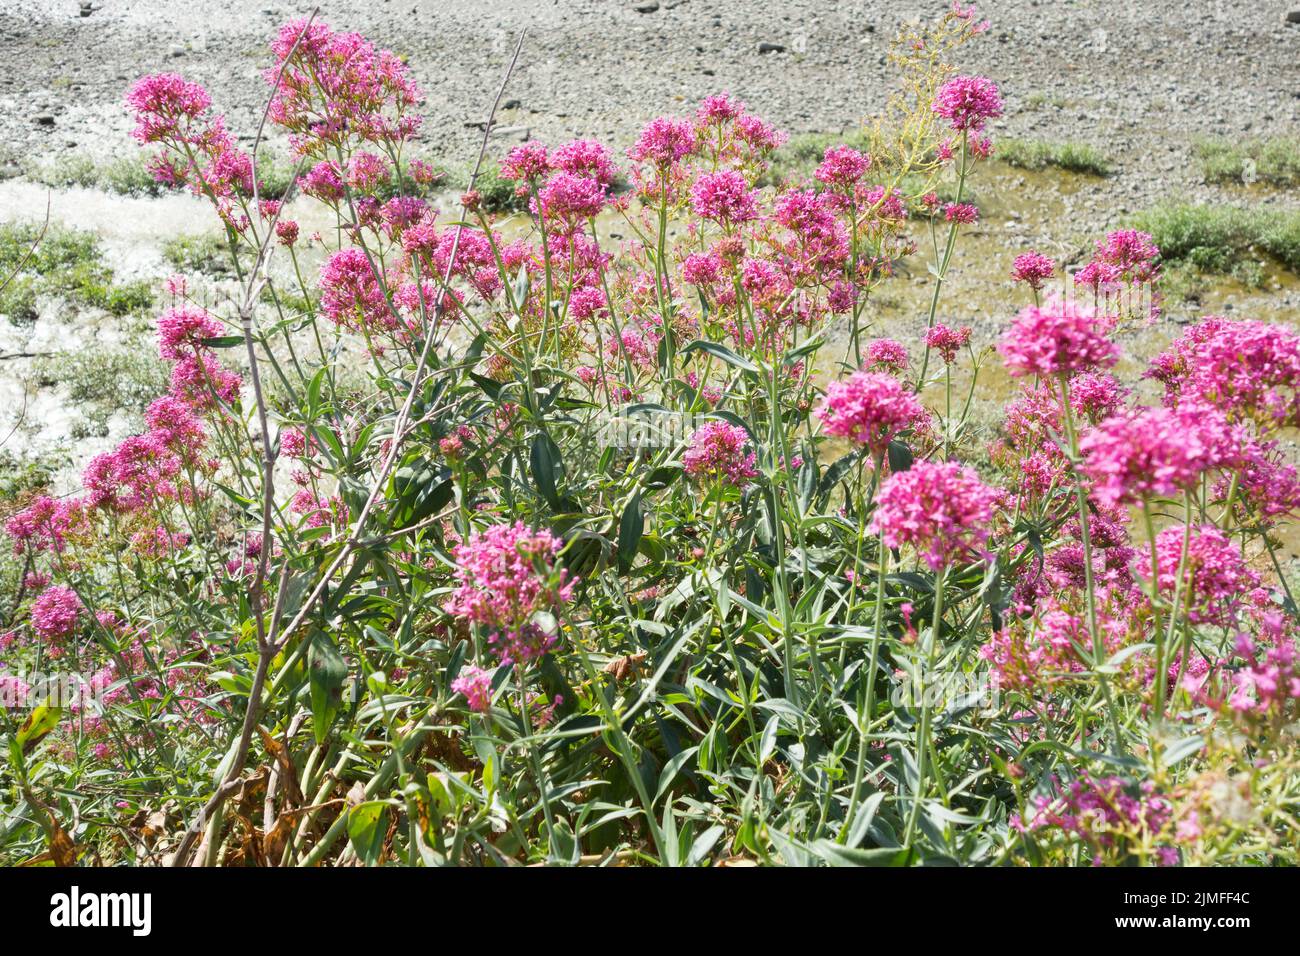 Red Valerian Plants (Centranthus ruber) on the banks of the River Thames in southwest London, England, UK Stock Photo